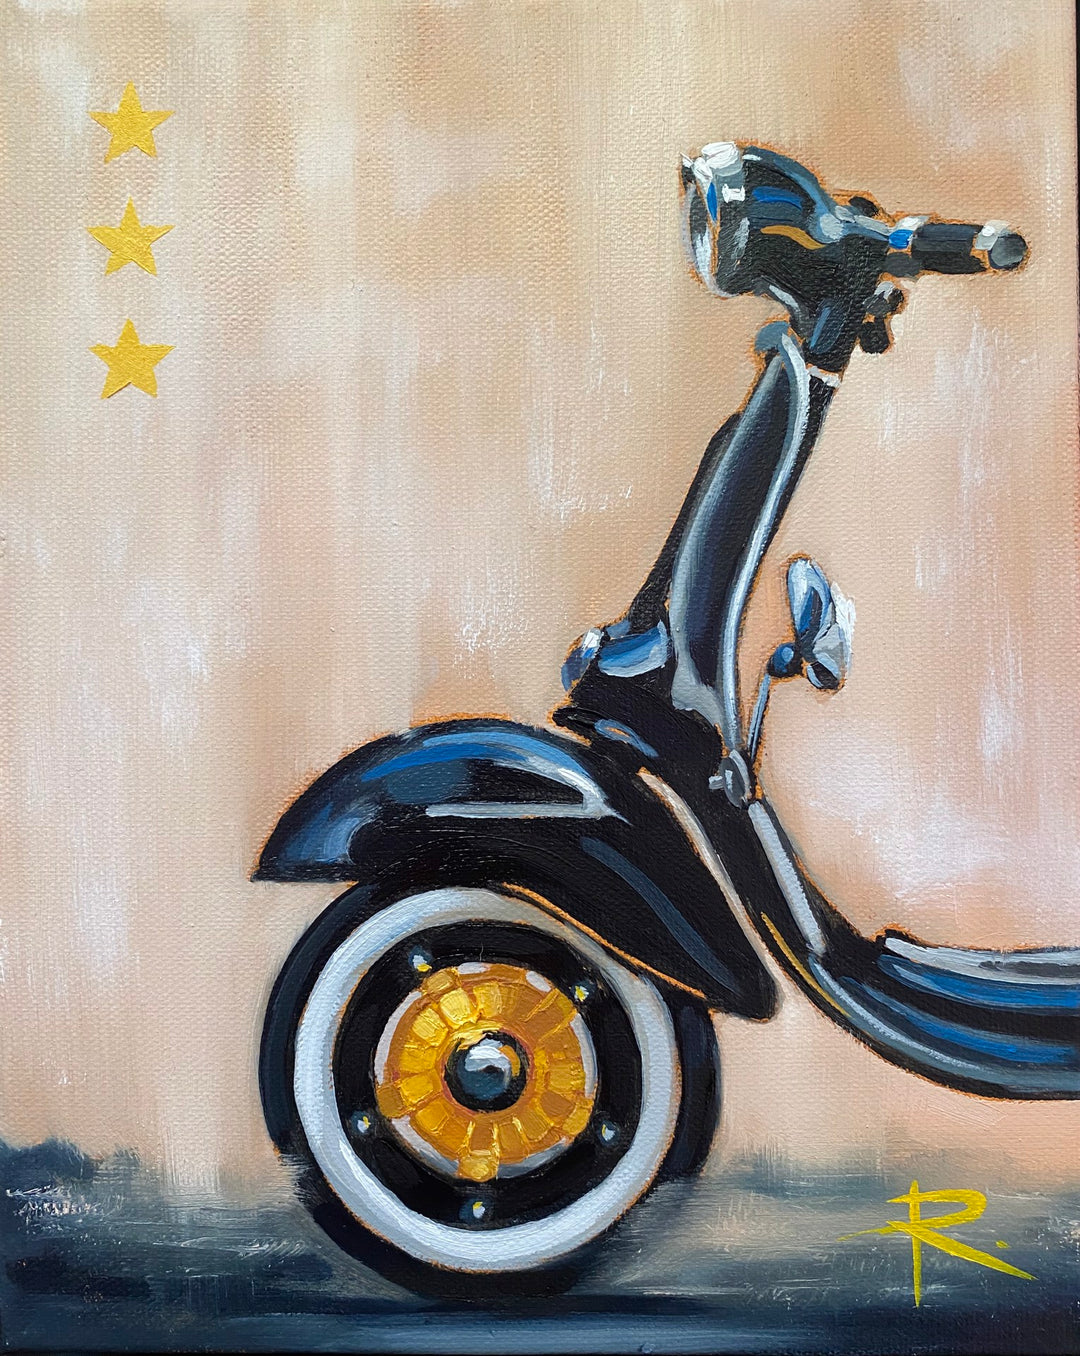 A painting of a black scooter with stars on it, featuring Rosa Fedele - "Milano I feat. Vespa Primavera Polini" and oil on canvas by Rosa Fedele.